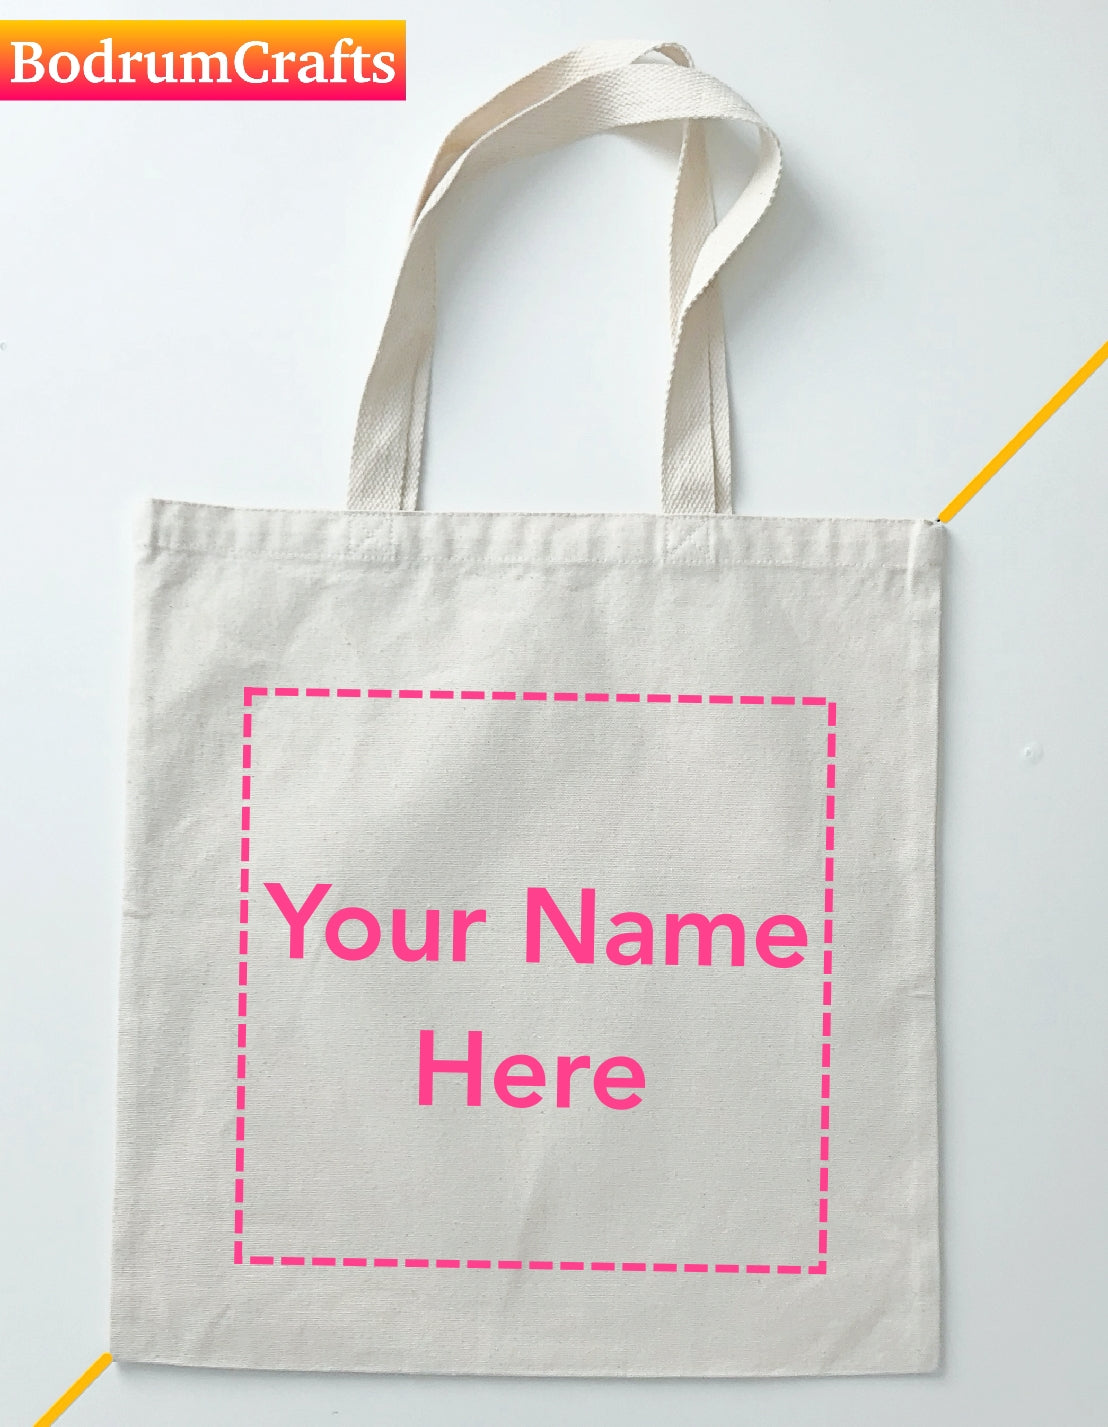 customized tote bags with names